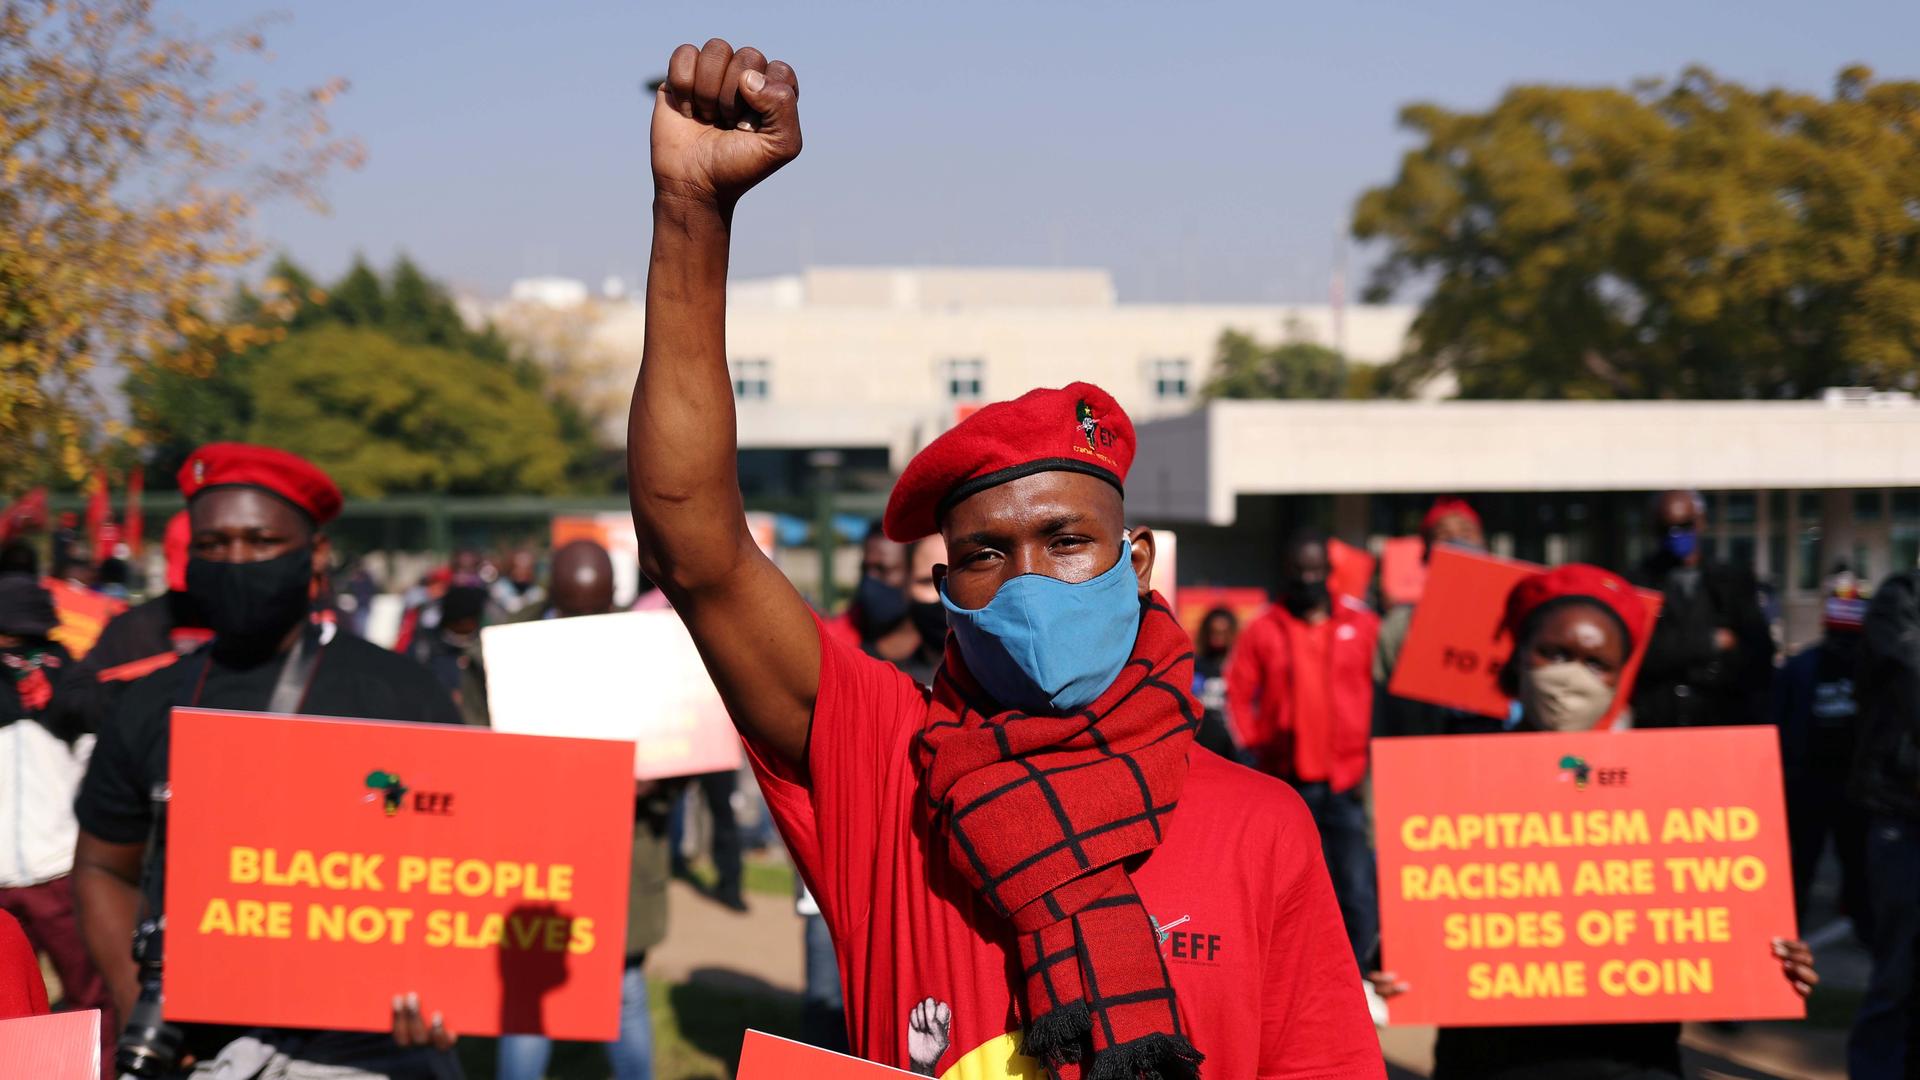 A member of South Africa's opposition party, the Economic Freedom Fighters (EFF), wears a red shirt and chants outside the US embassy in Pretoria, South Africa, on June 8, 2020. 